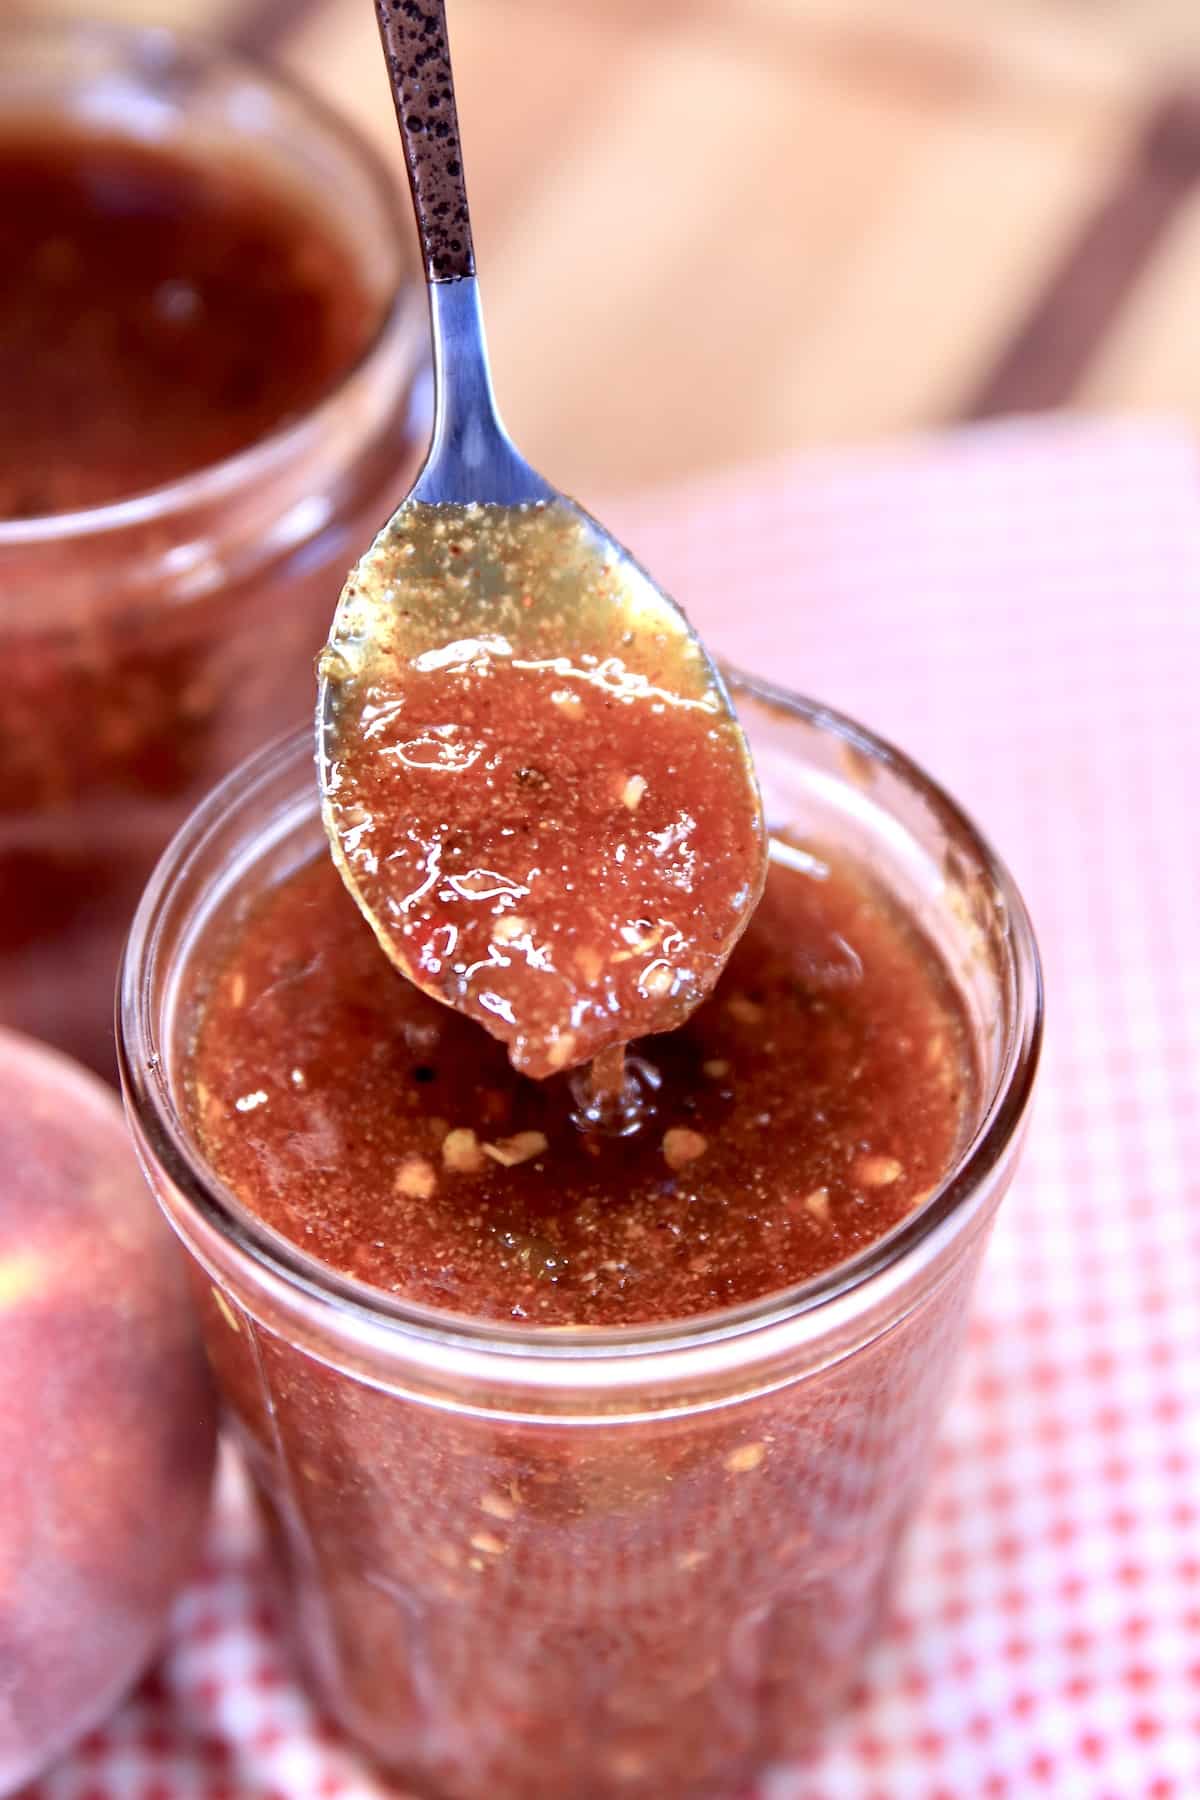 Spoonful of peach bbq sauce.